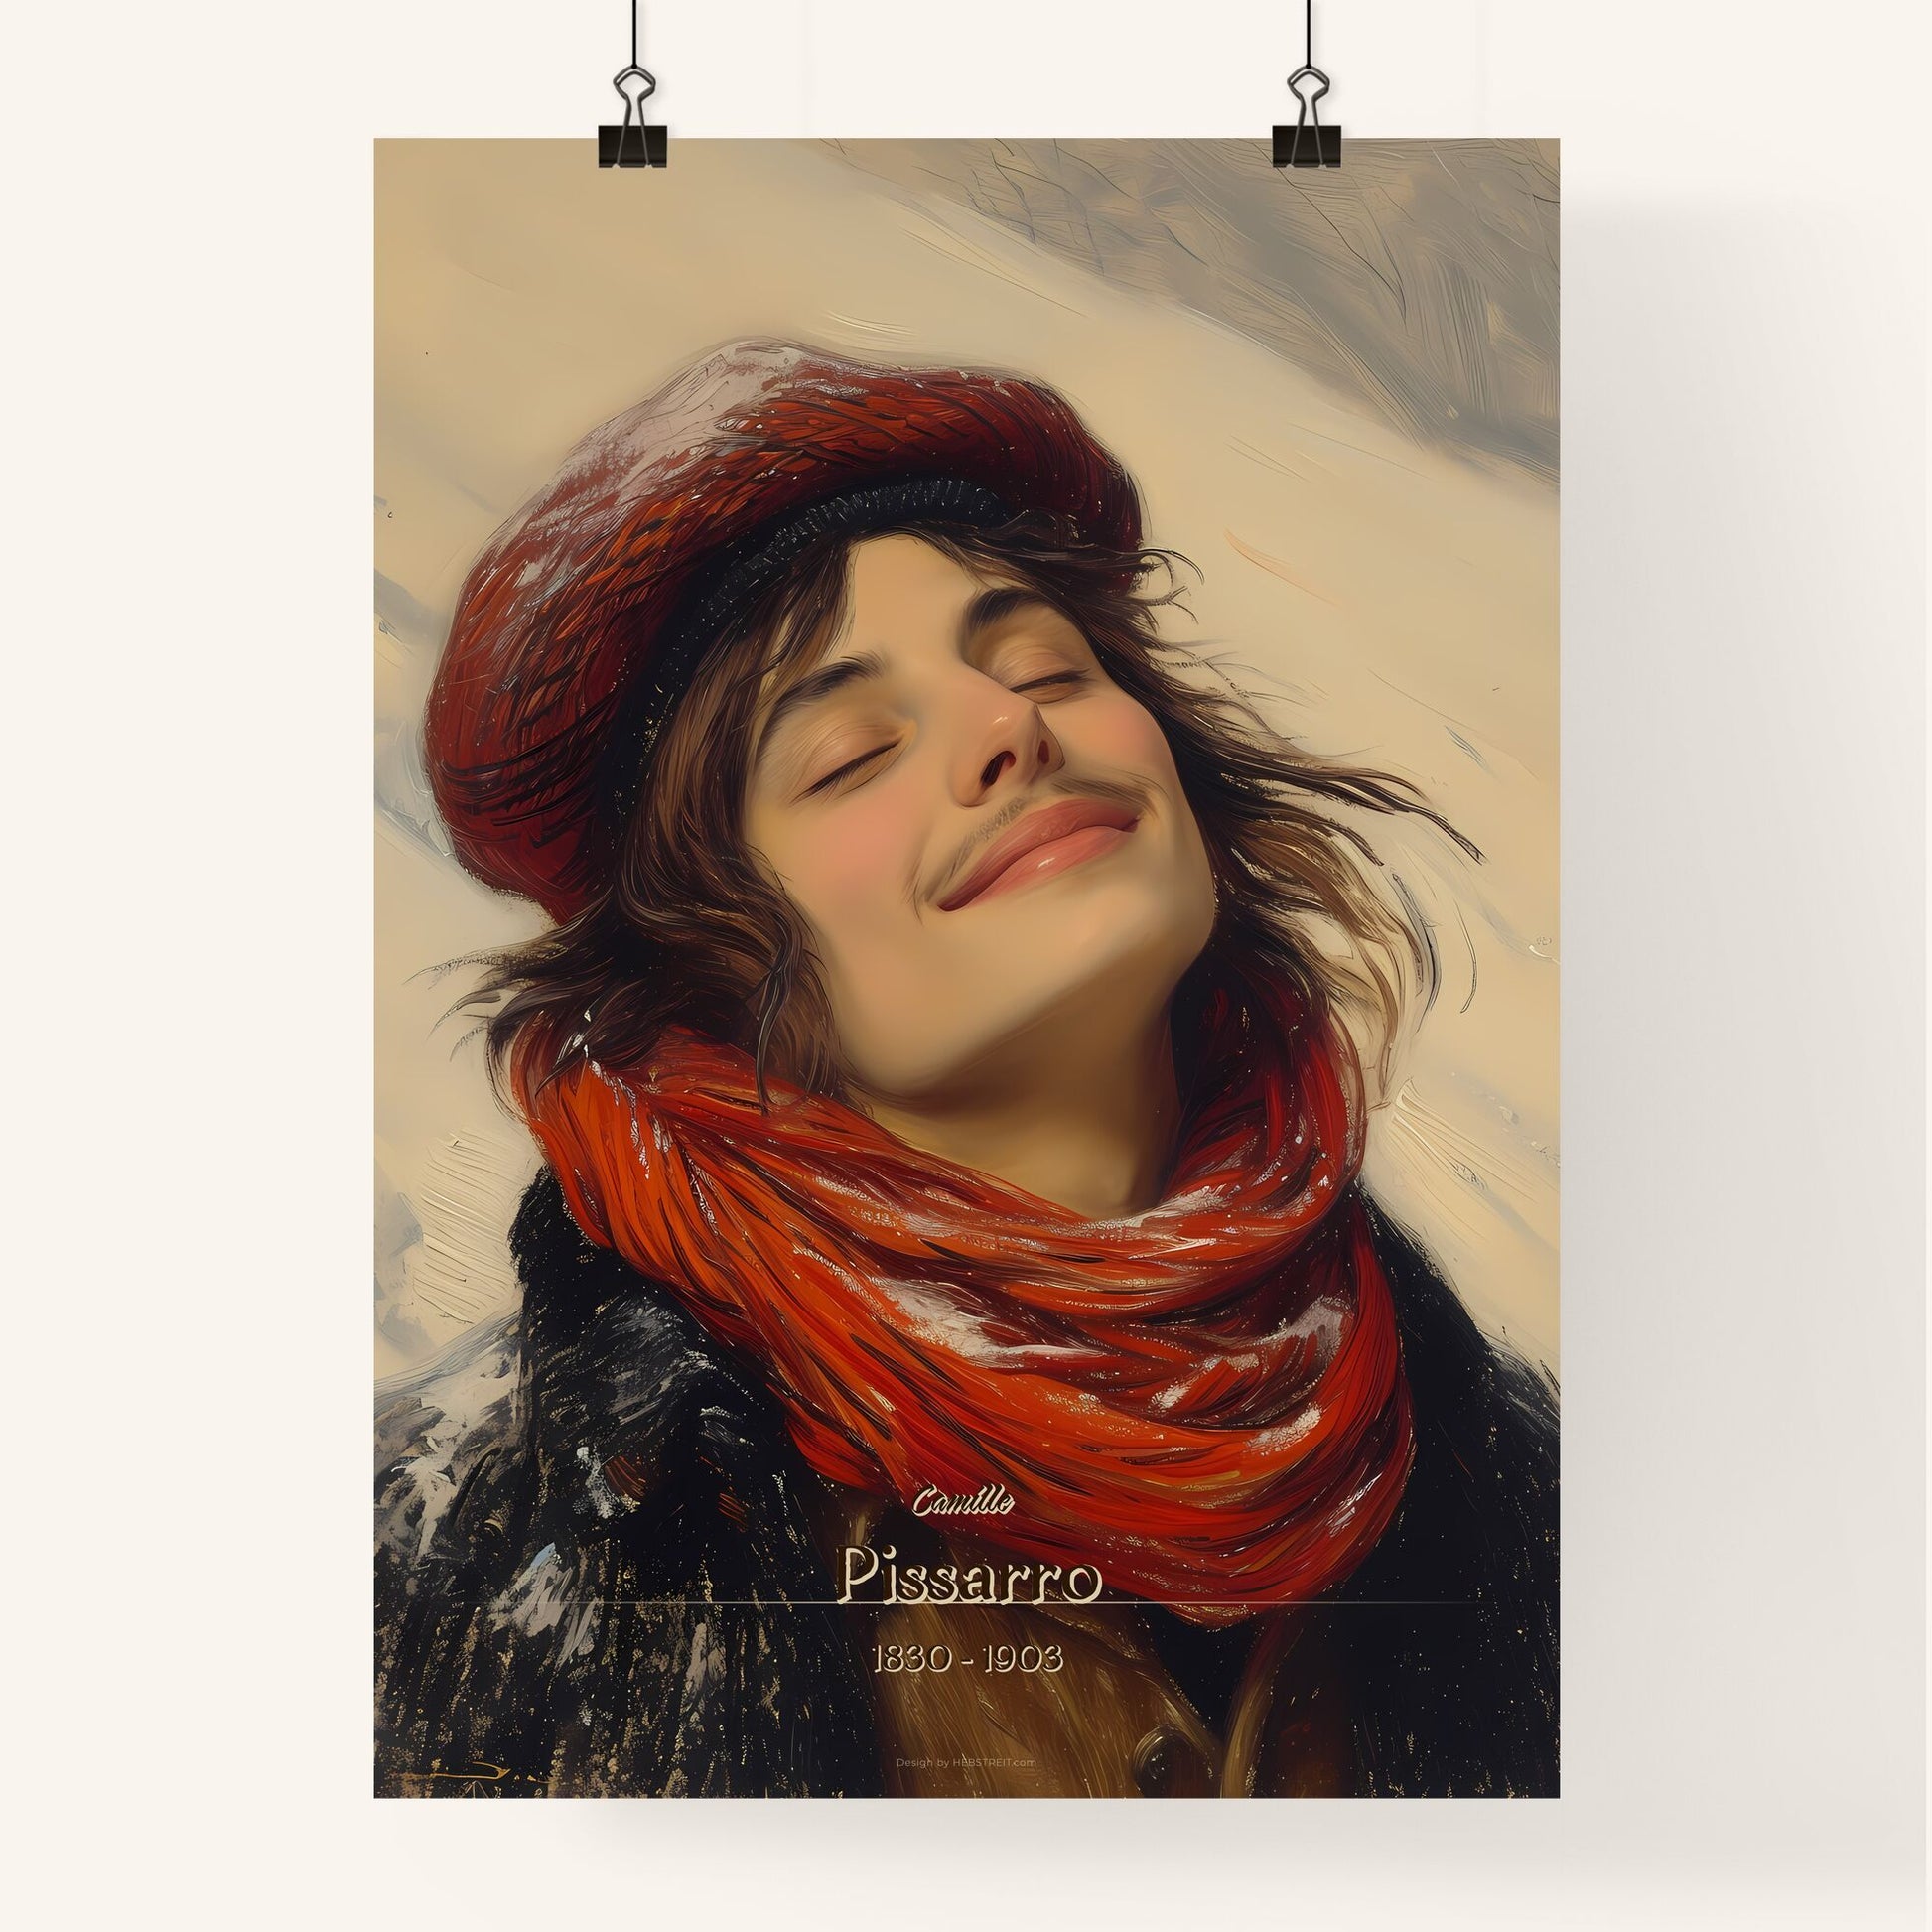 Camille, Pissarro, 1830 - 1903, A Poster of a person with a red hat and scarf Default Title